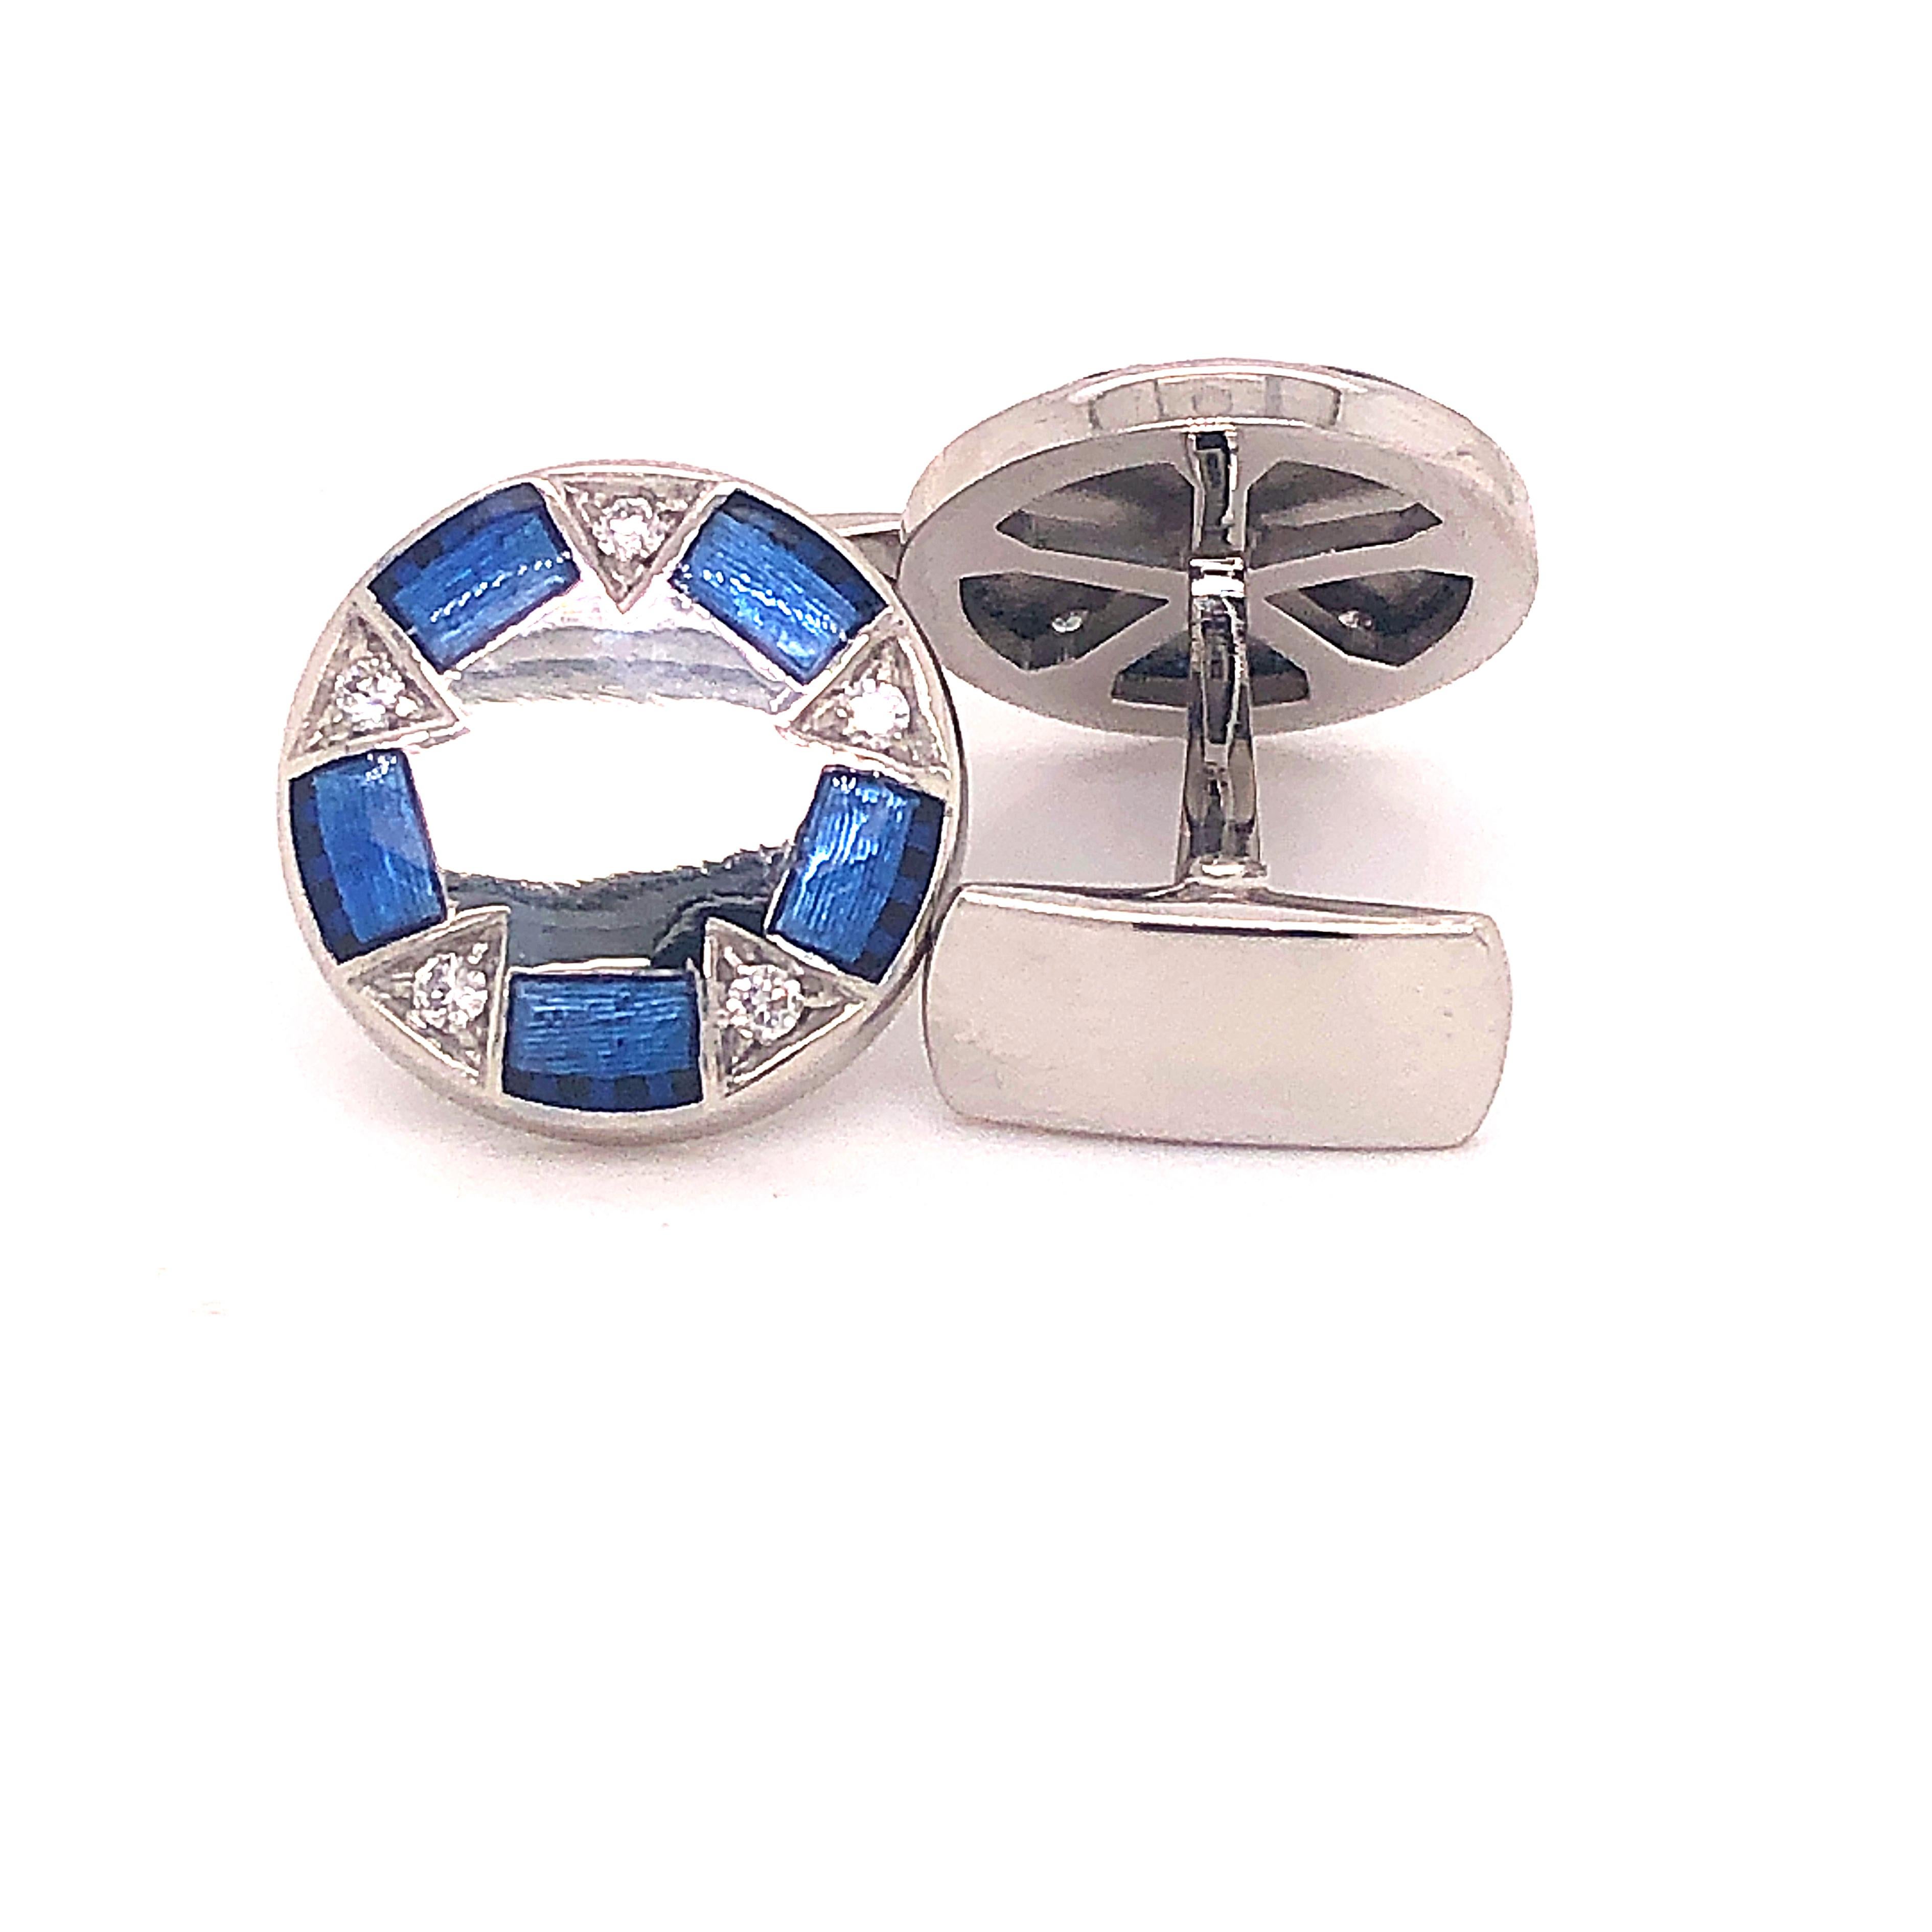 Berca 0.2Kt White Diamond Navy Blue Hand Enameled Lunette 950 Platinum Cufflinks In New Condition For Sale In Valenza, IT